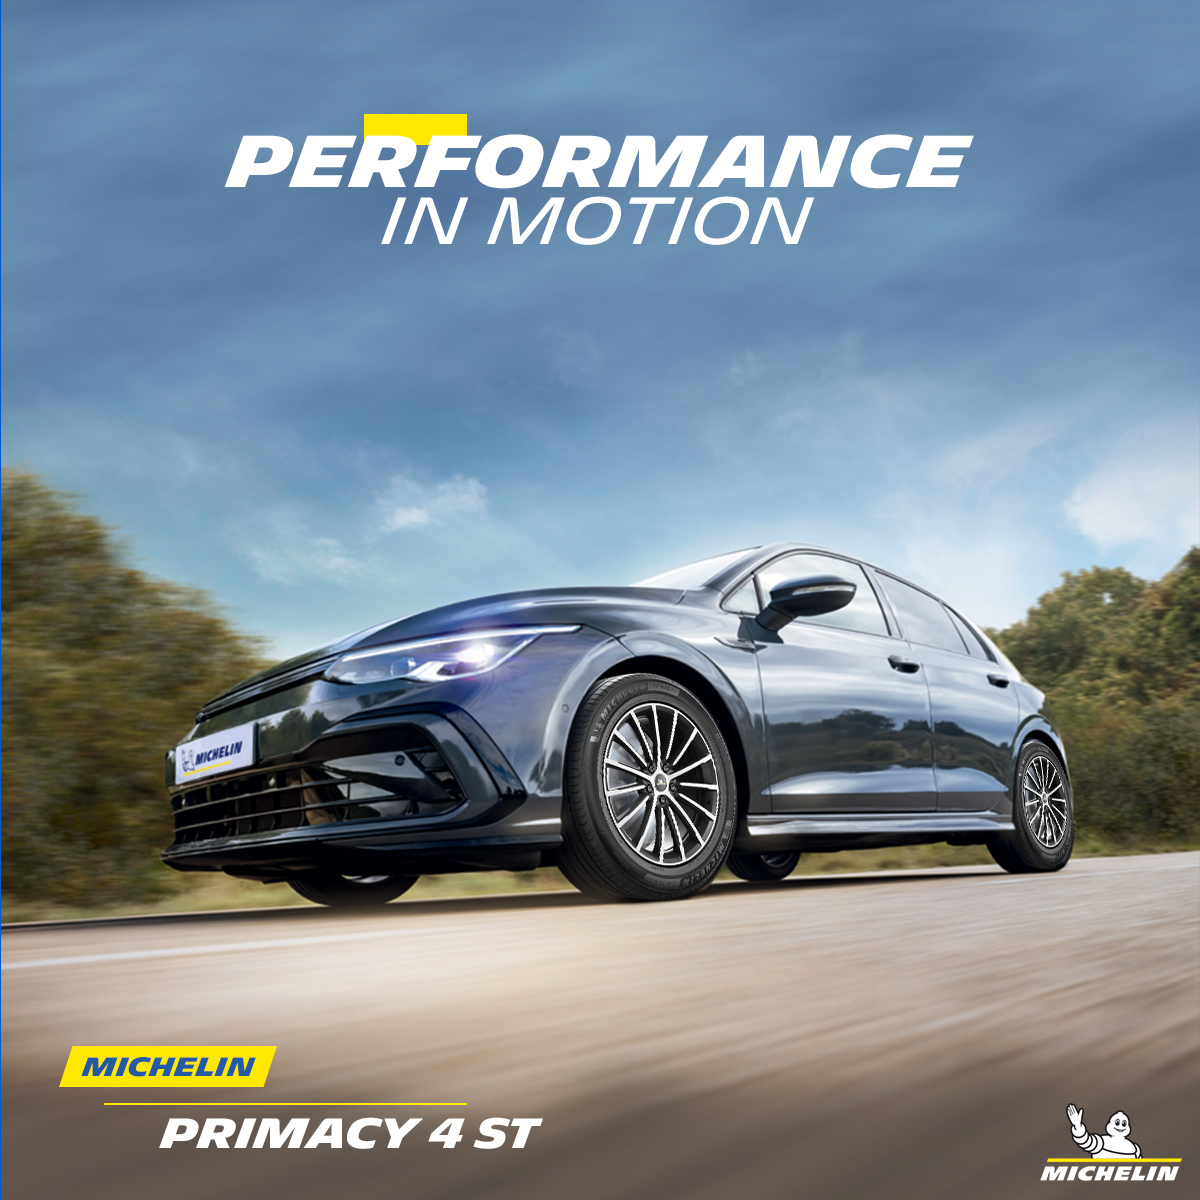 Silent. Smooth. Supreme. 
Enjoy the luxury of driving with Michelin Primacy 4ST. 

Read More: bit.ly/3WzLgfn 

#MichelinTyres 
#MichelinPrimacy4 
#MichelinPerformance